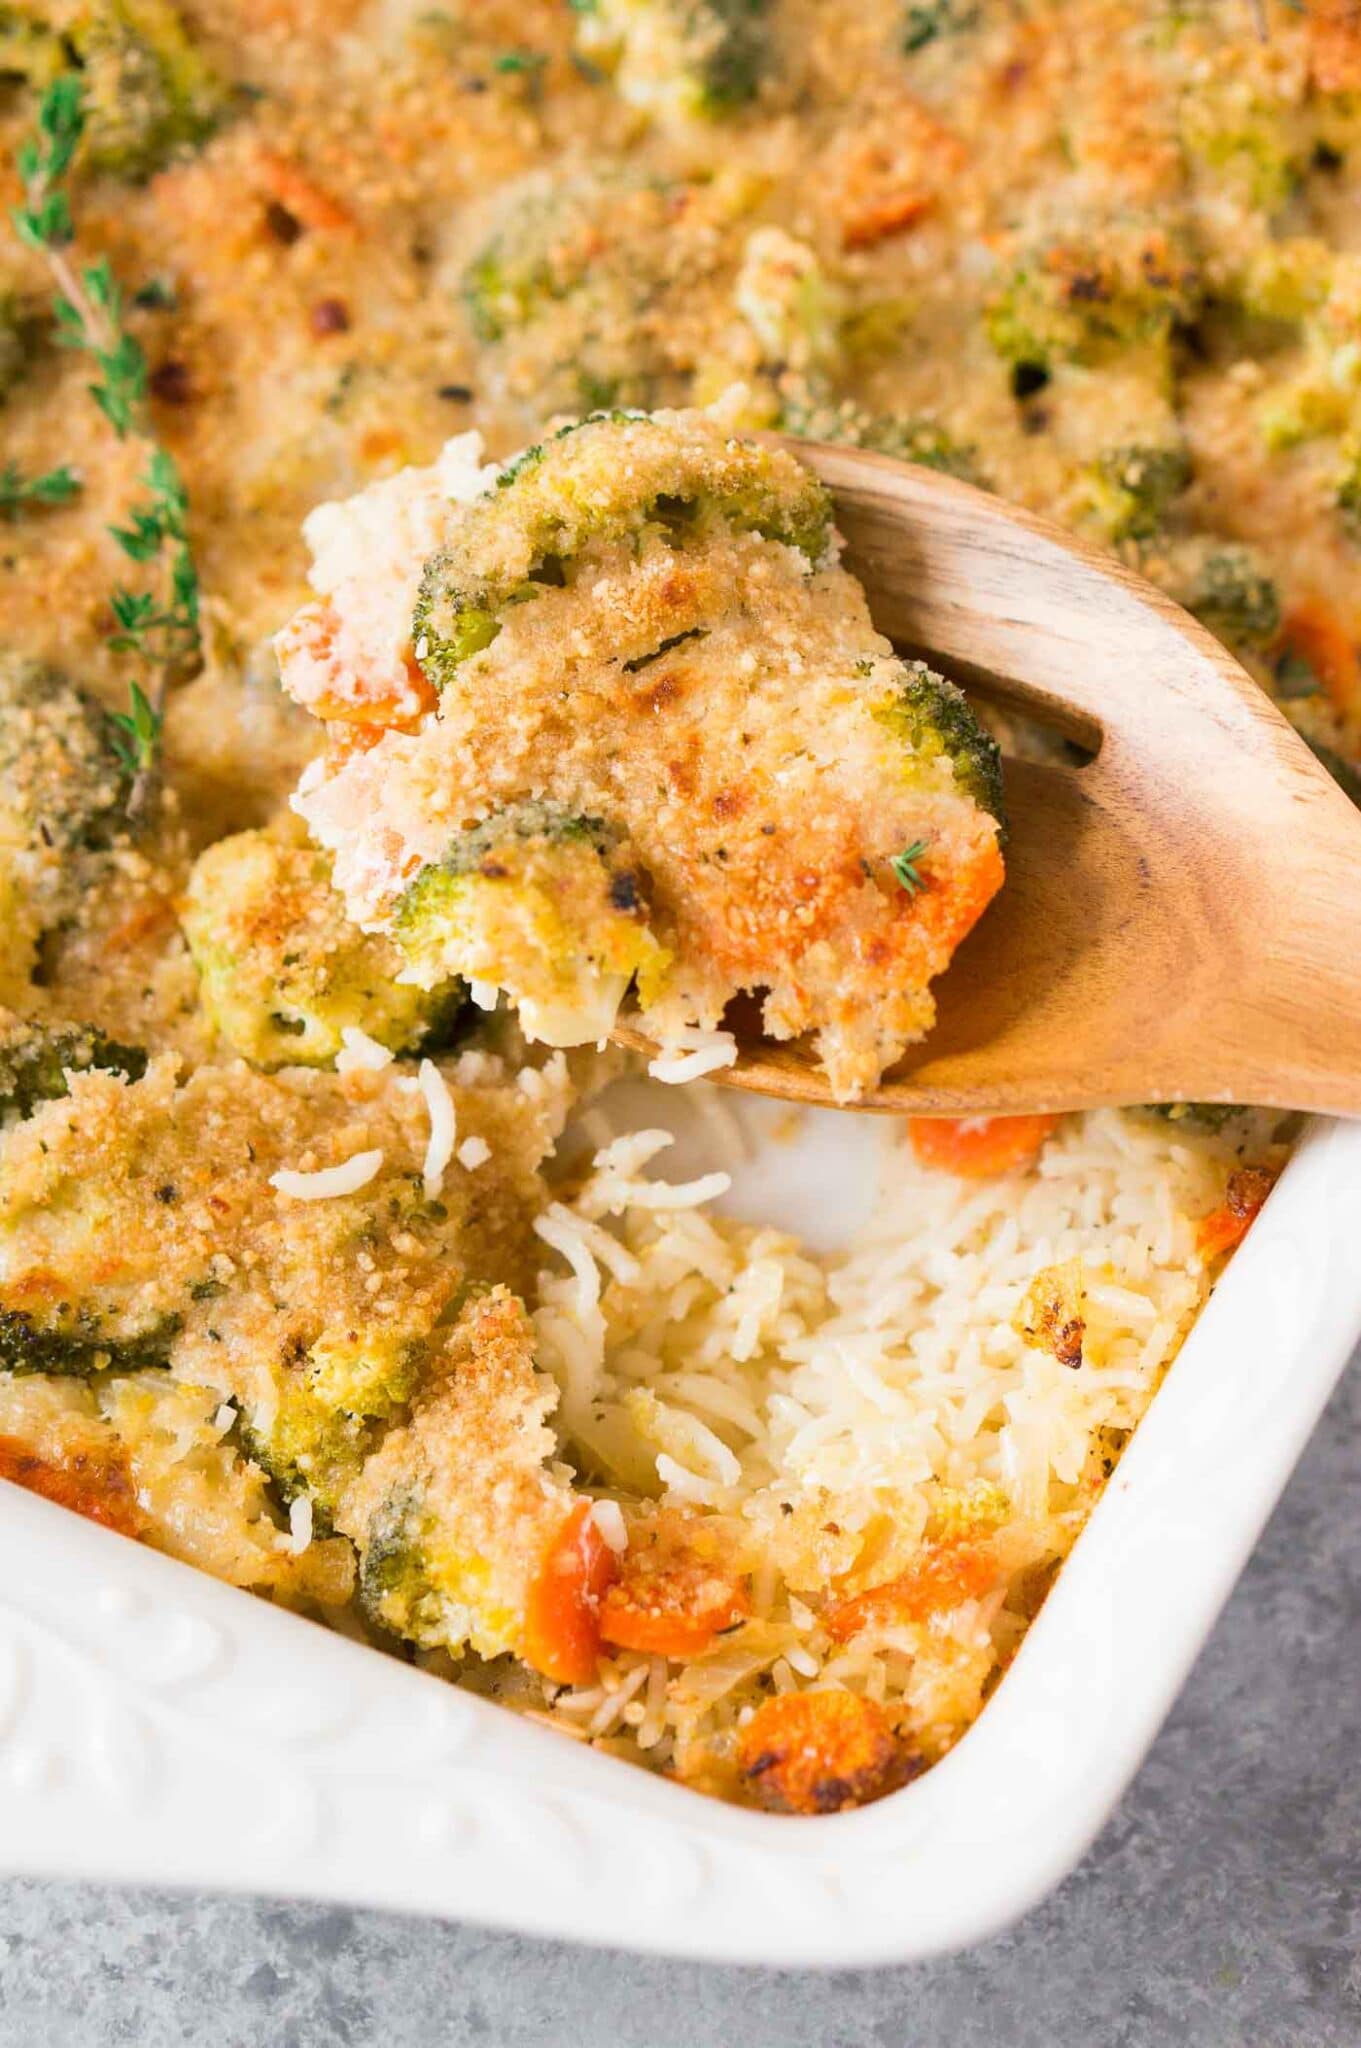 a scoop from the rice casserole with broccoli and cheese